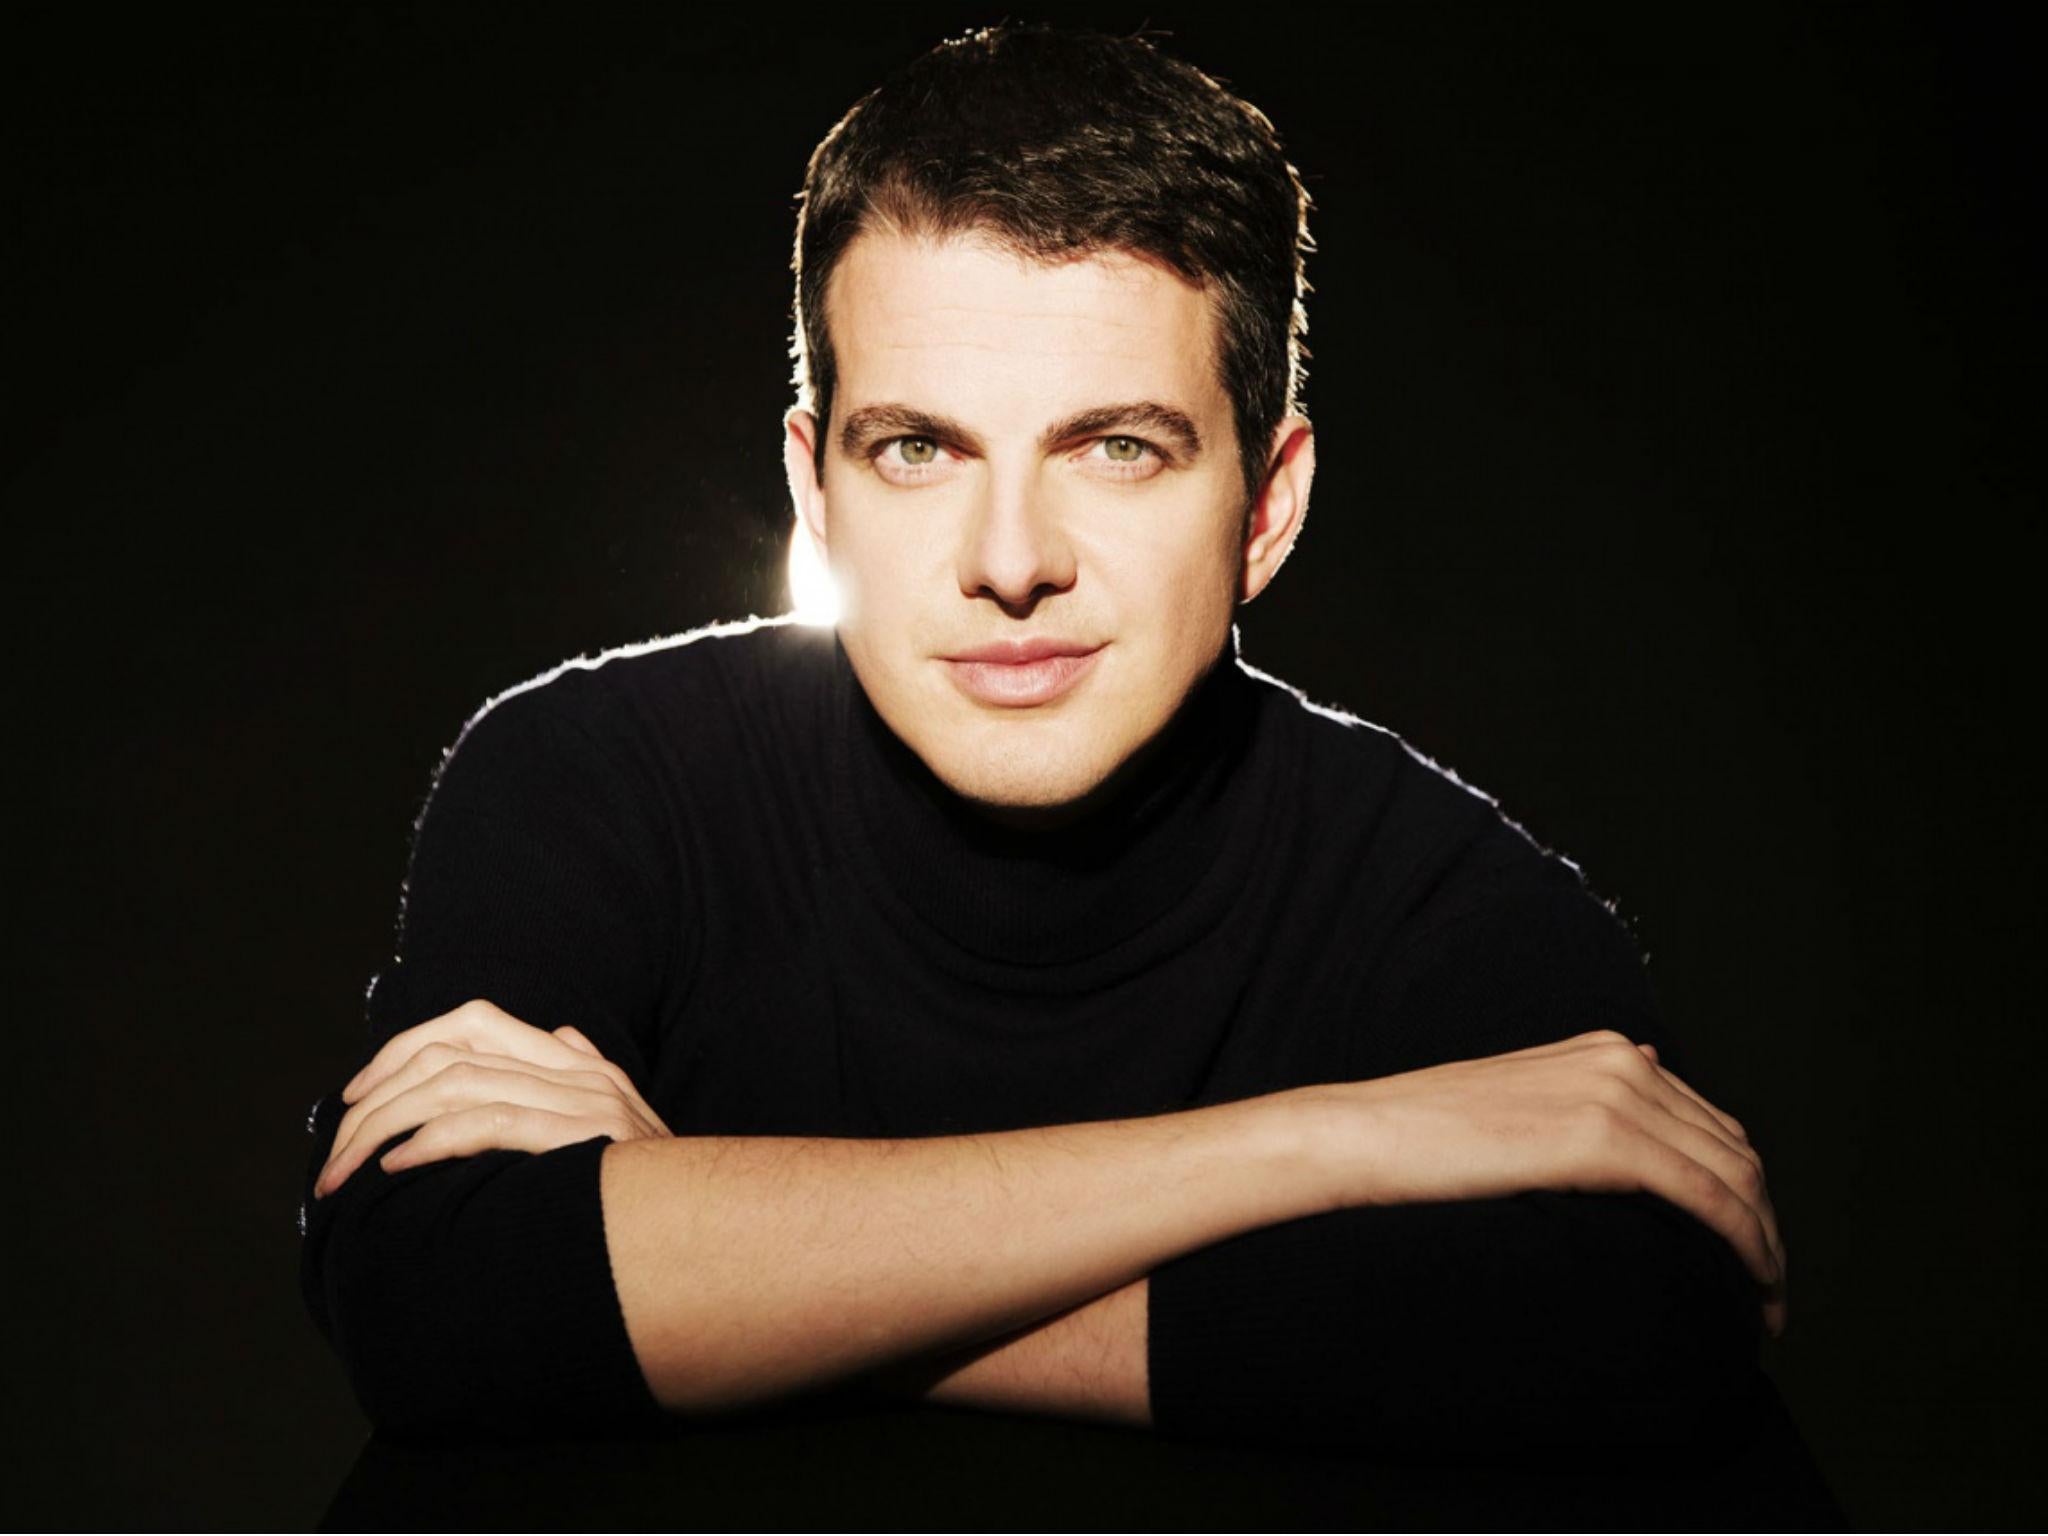 The famous French countertenor Philippe Jaroussky performed at London's Wigmore Hall